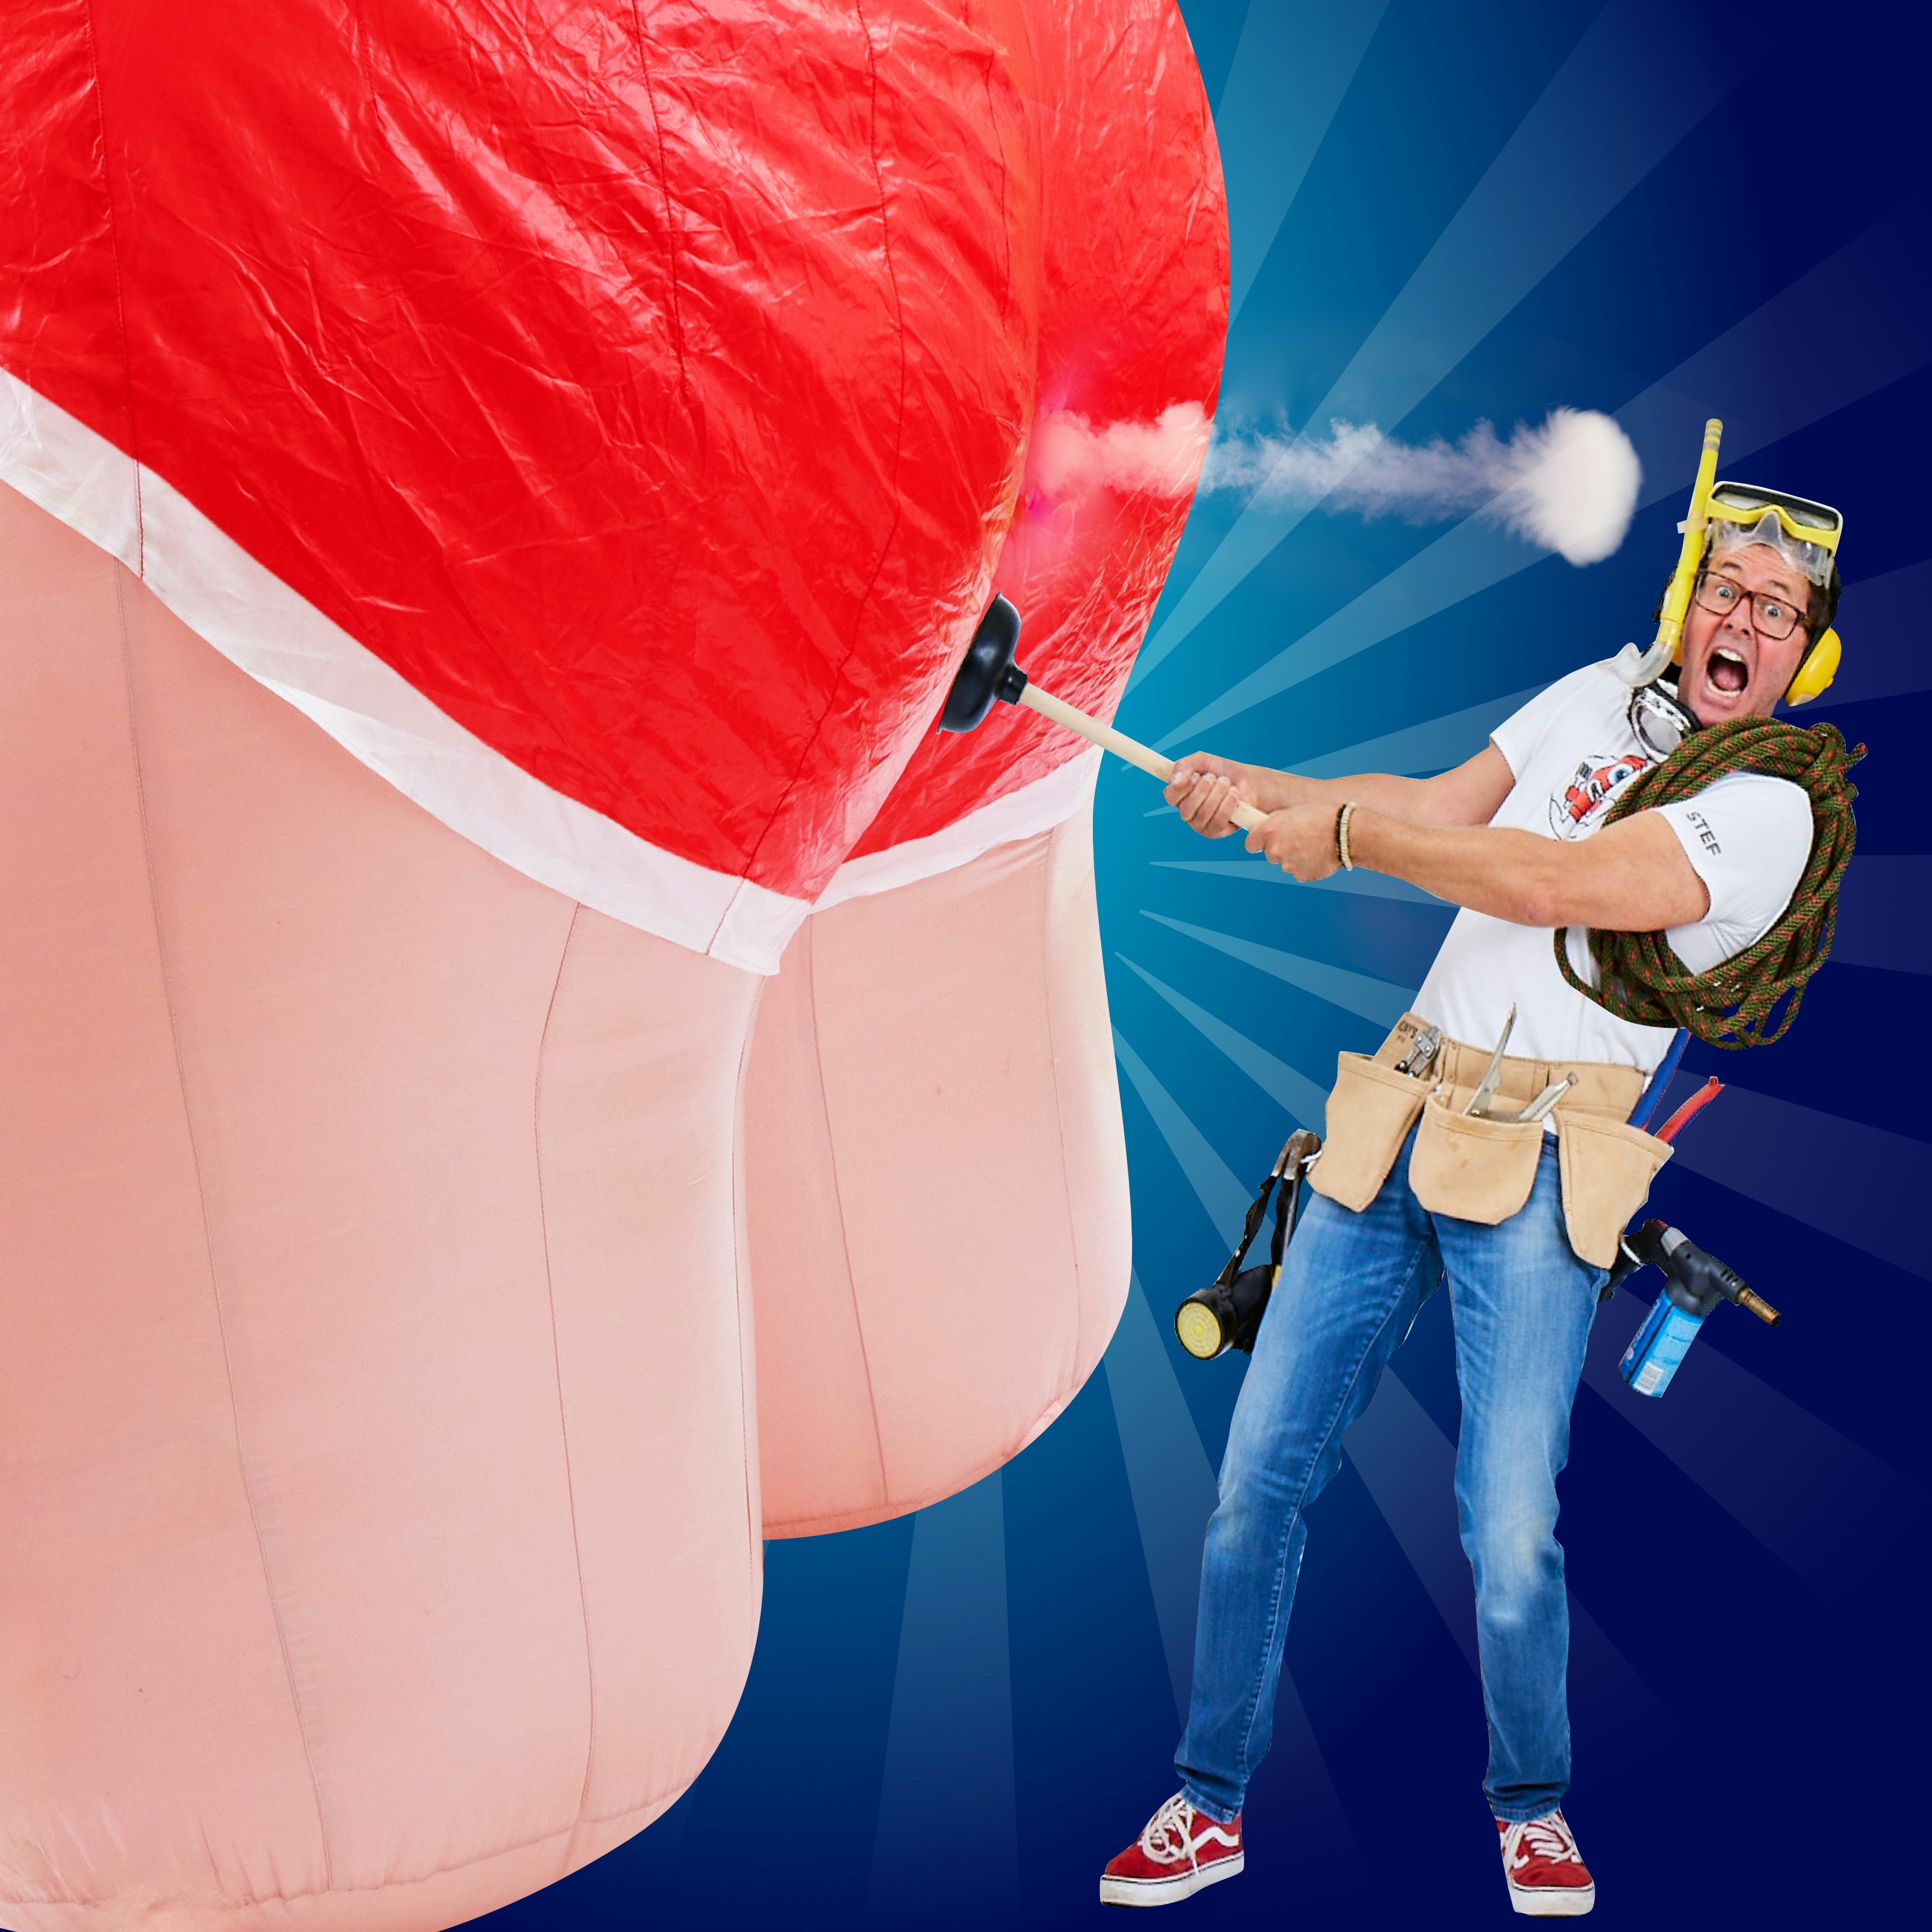 A promotion image for the show Rude Science, the image shows a person wearing a tool belt, holding a plunger next to an inflatable bottom.